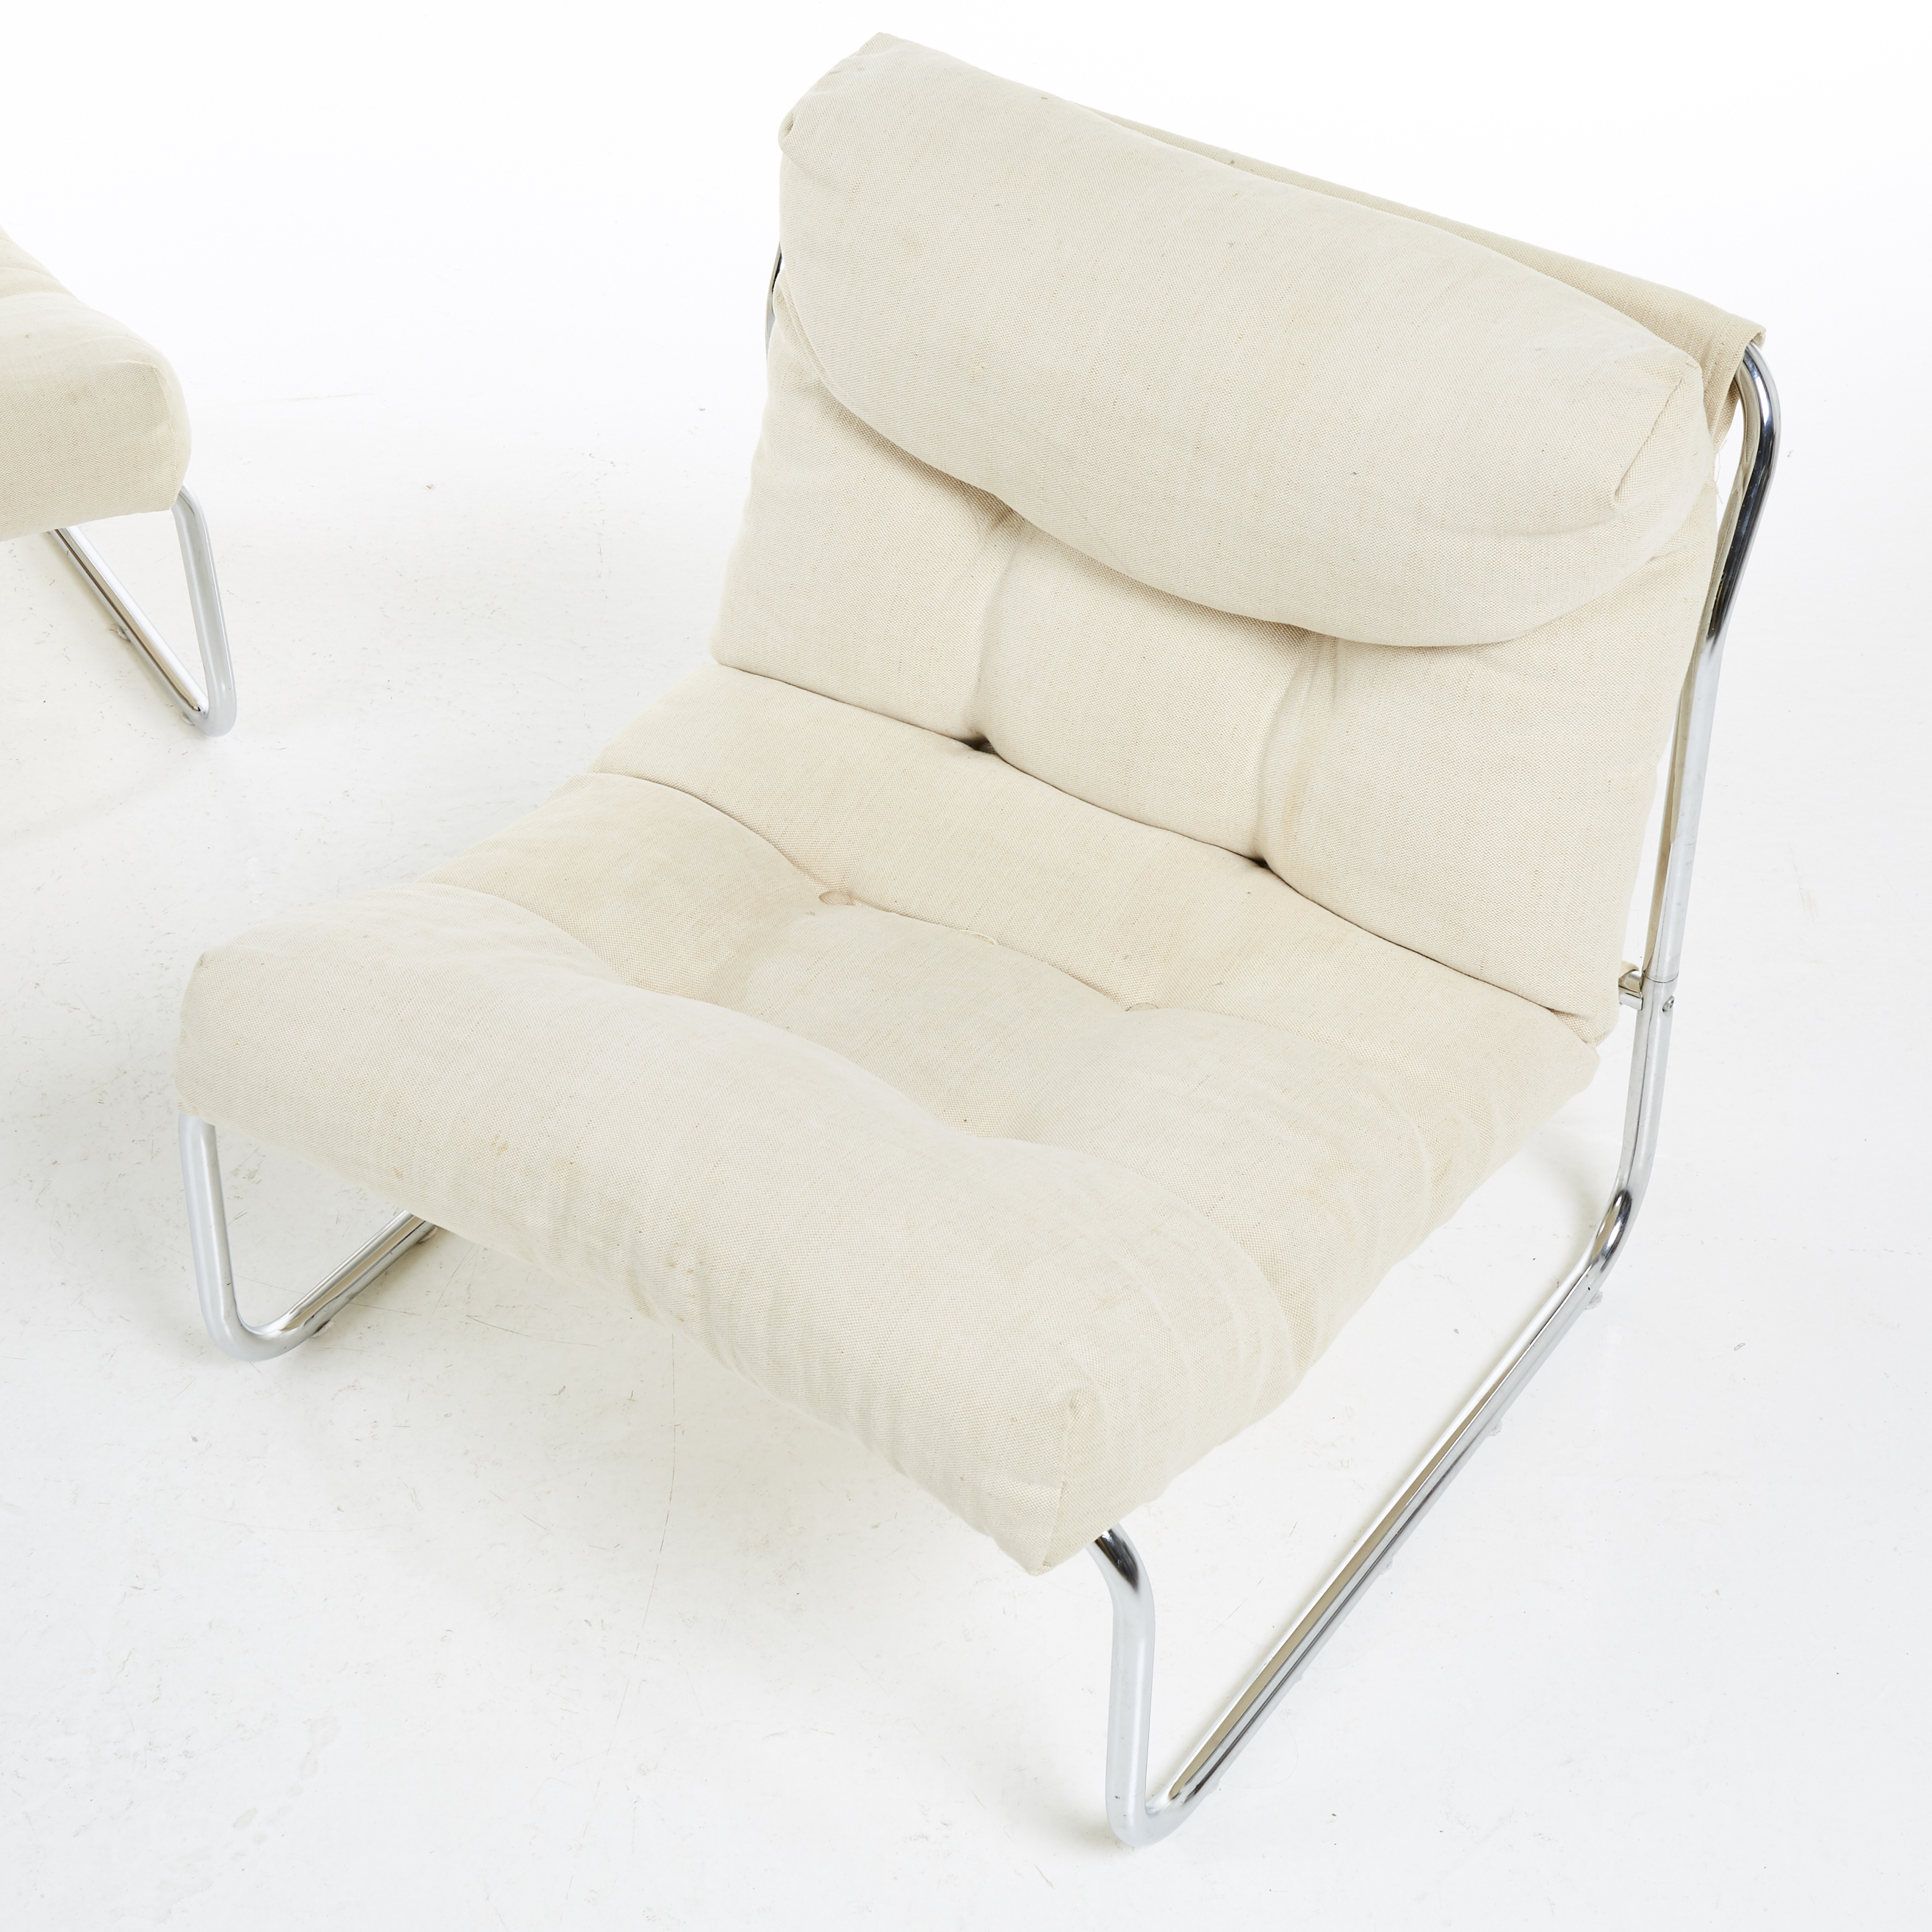 This Weeks Auction: Gillis Lundgren "Pixi" chair by IKEA